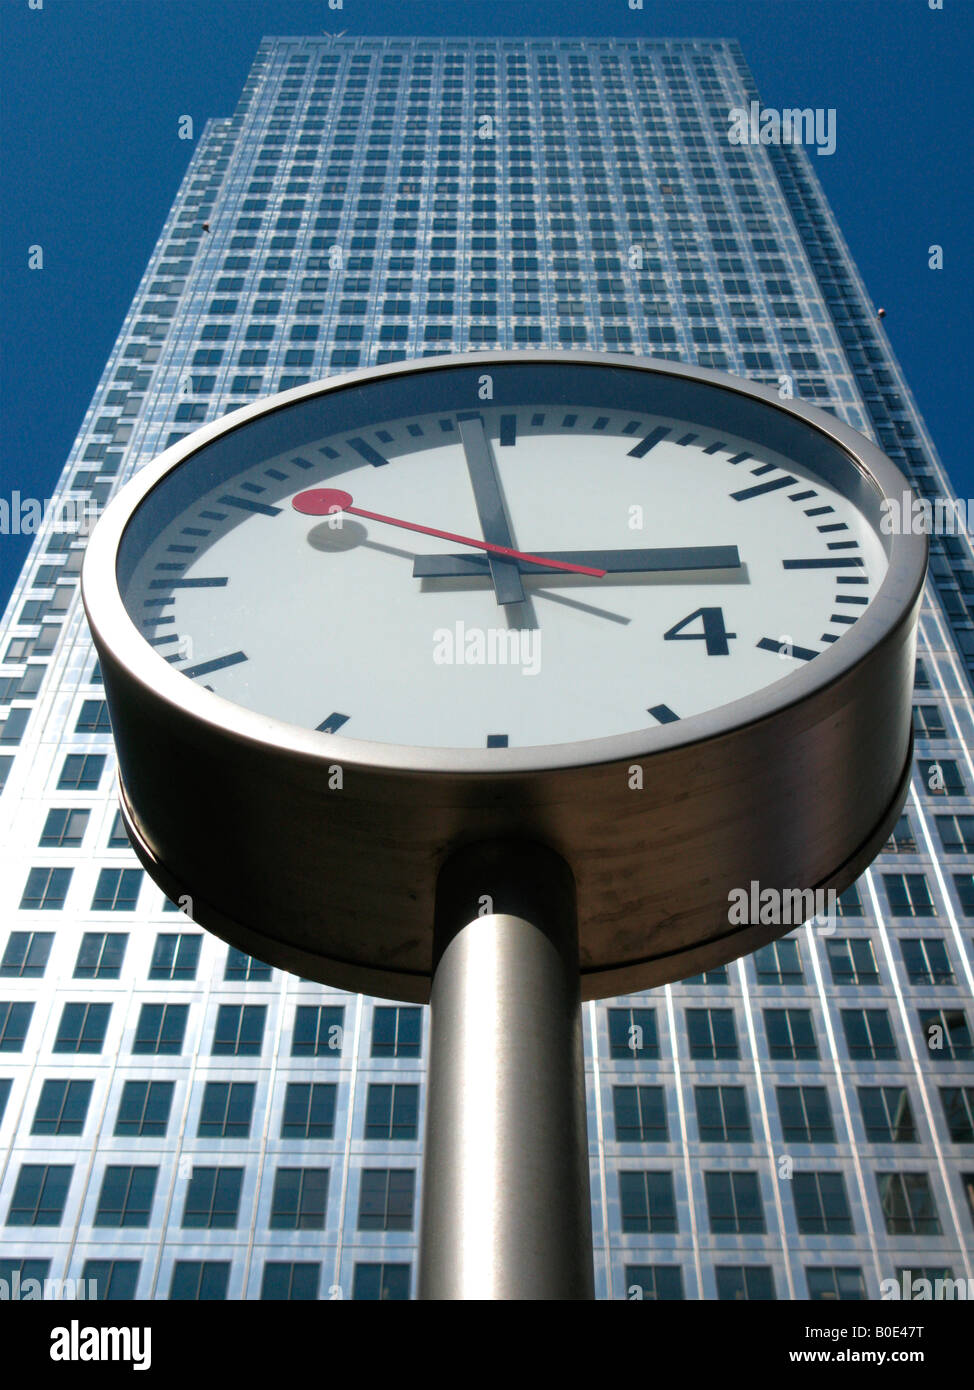 Clock in Reuters Plaza, Canary Wharf Stock Photo